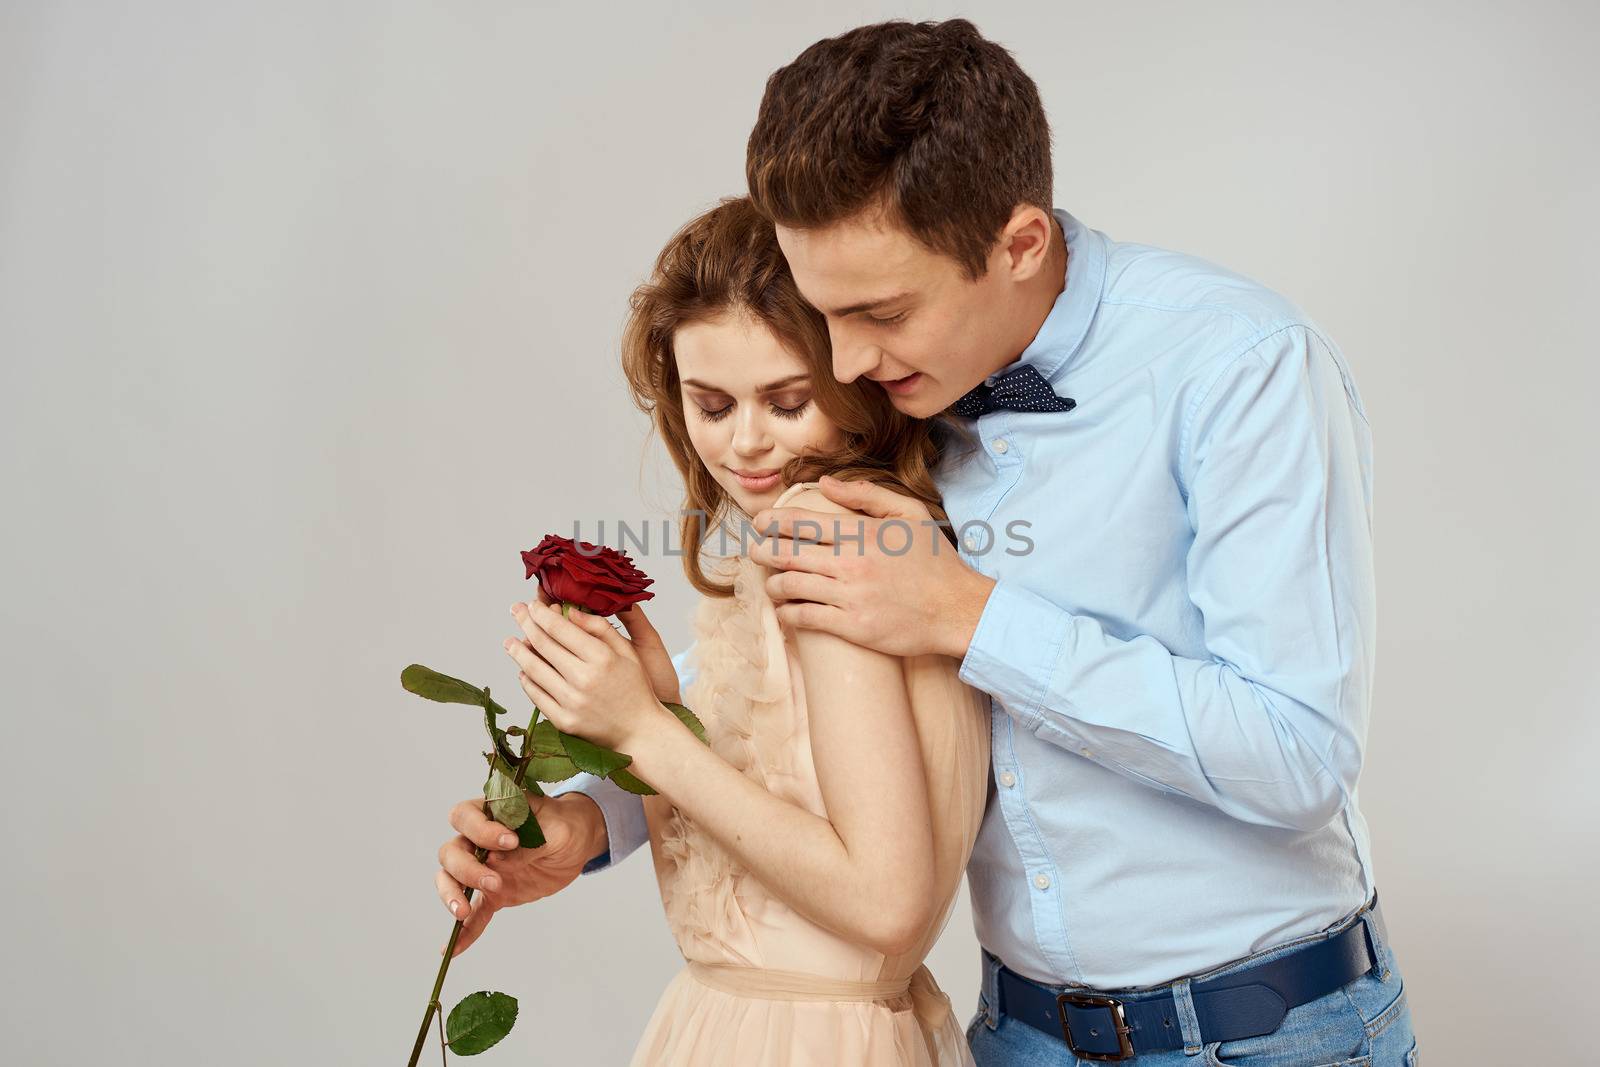 lovers men and woman hugs romance love red rose light background. High quality photo